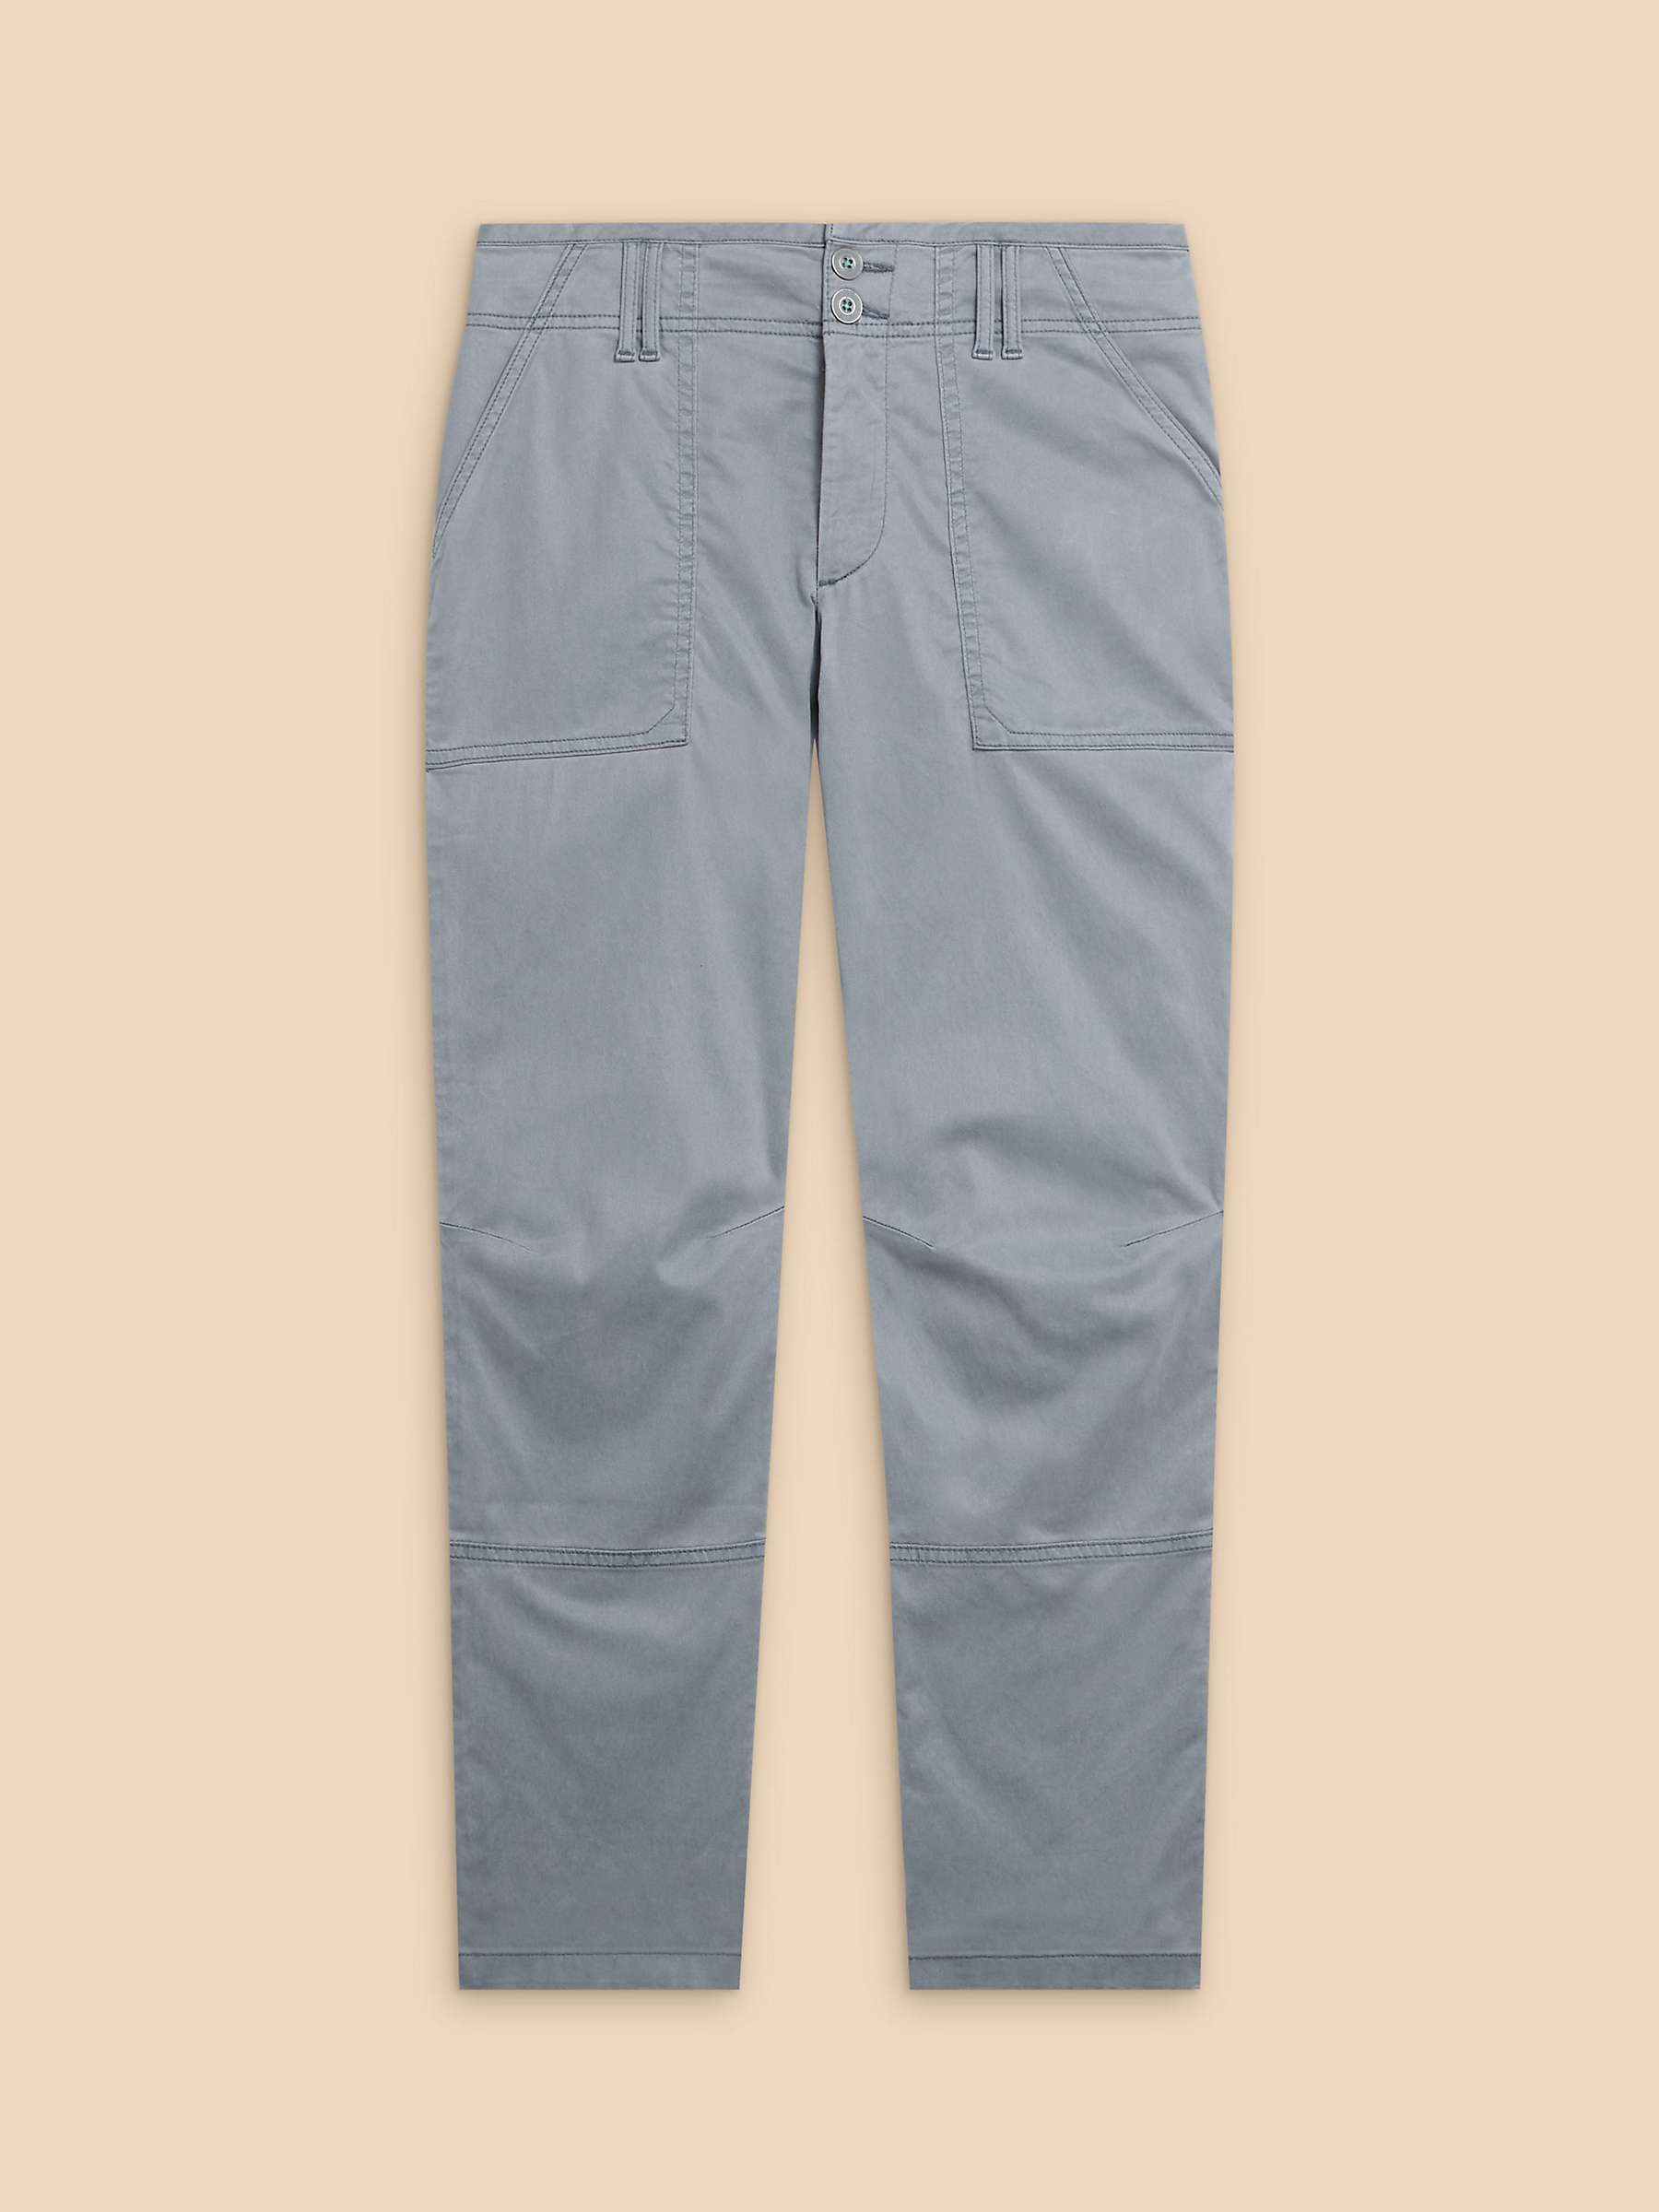 Buy White Stuff Blaire Trousers Online at johnlewis.com